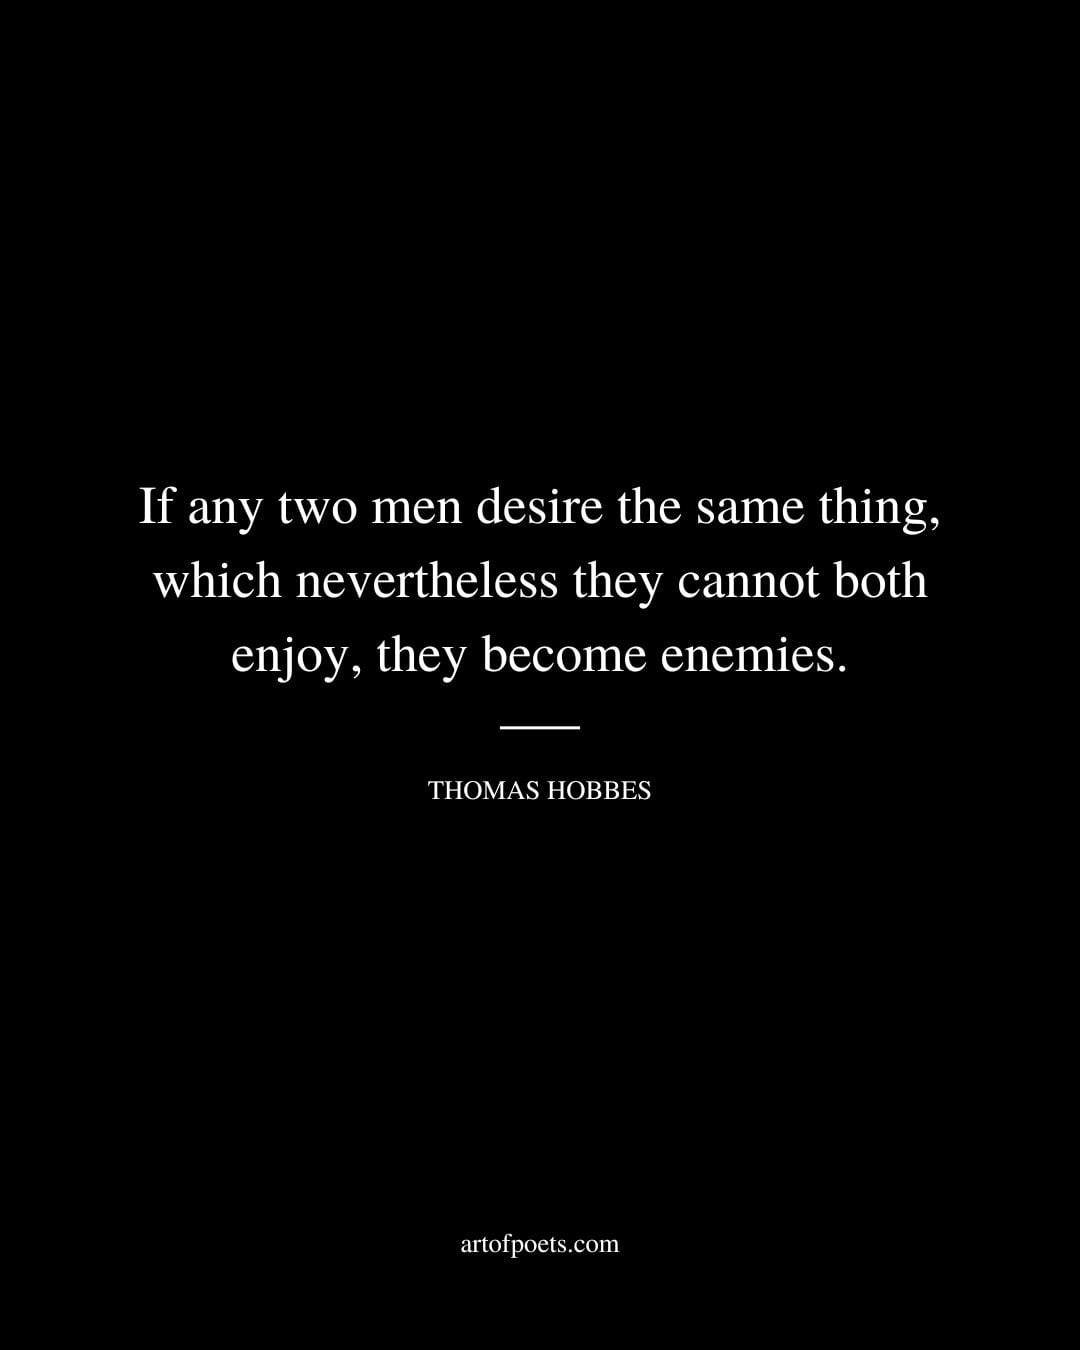 If any two men desire the same thing which nevertheless they cannot both enjoy they become enemies